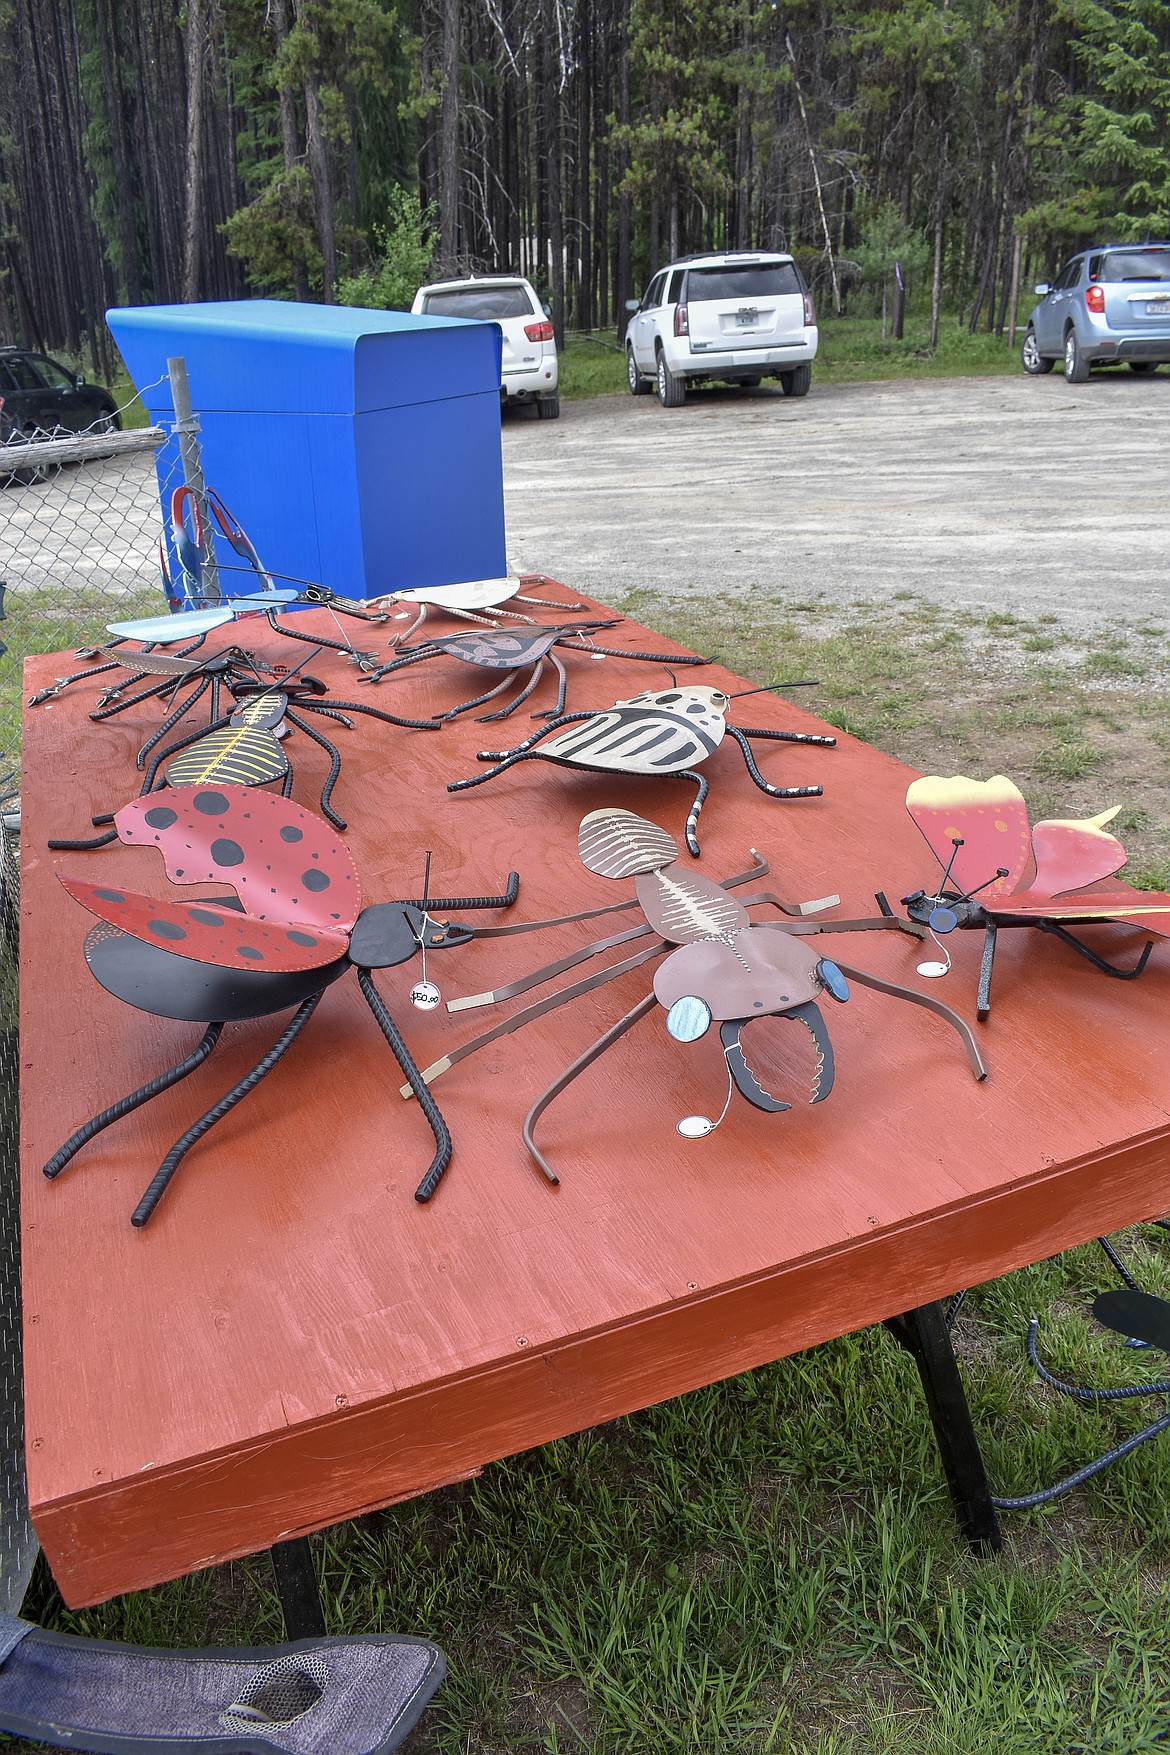 Jimmy Jones brought a table full of painstakingly detailed metal insects and arachnids to the sixth annual Yaak School Arts and Crafts Fair Saturday, June 30. Jones said that his main business is the wood burning stoves he also had for sale, but that he enjoys making the art -- which began as a way to use scrap metal -- much more than the stoves. (Ben Kibbey/The Western News)